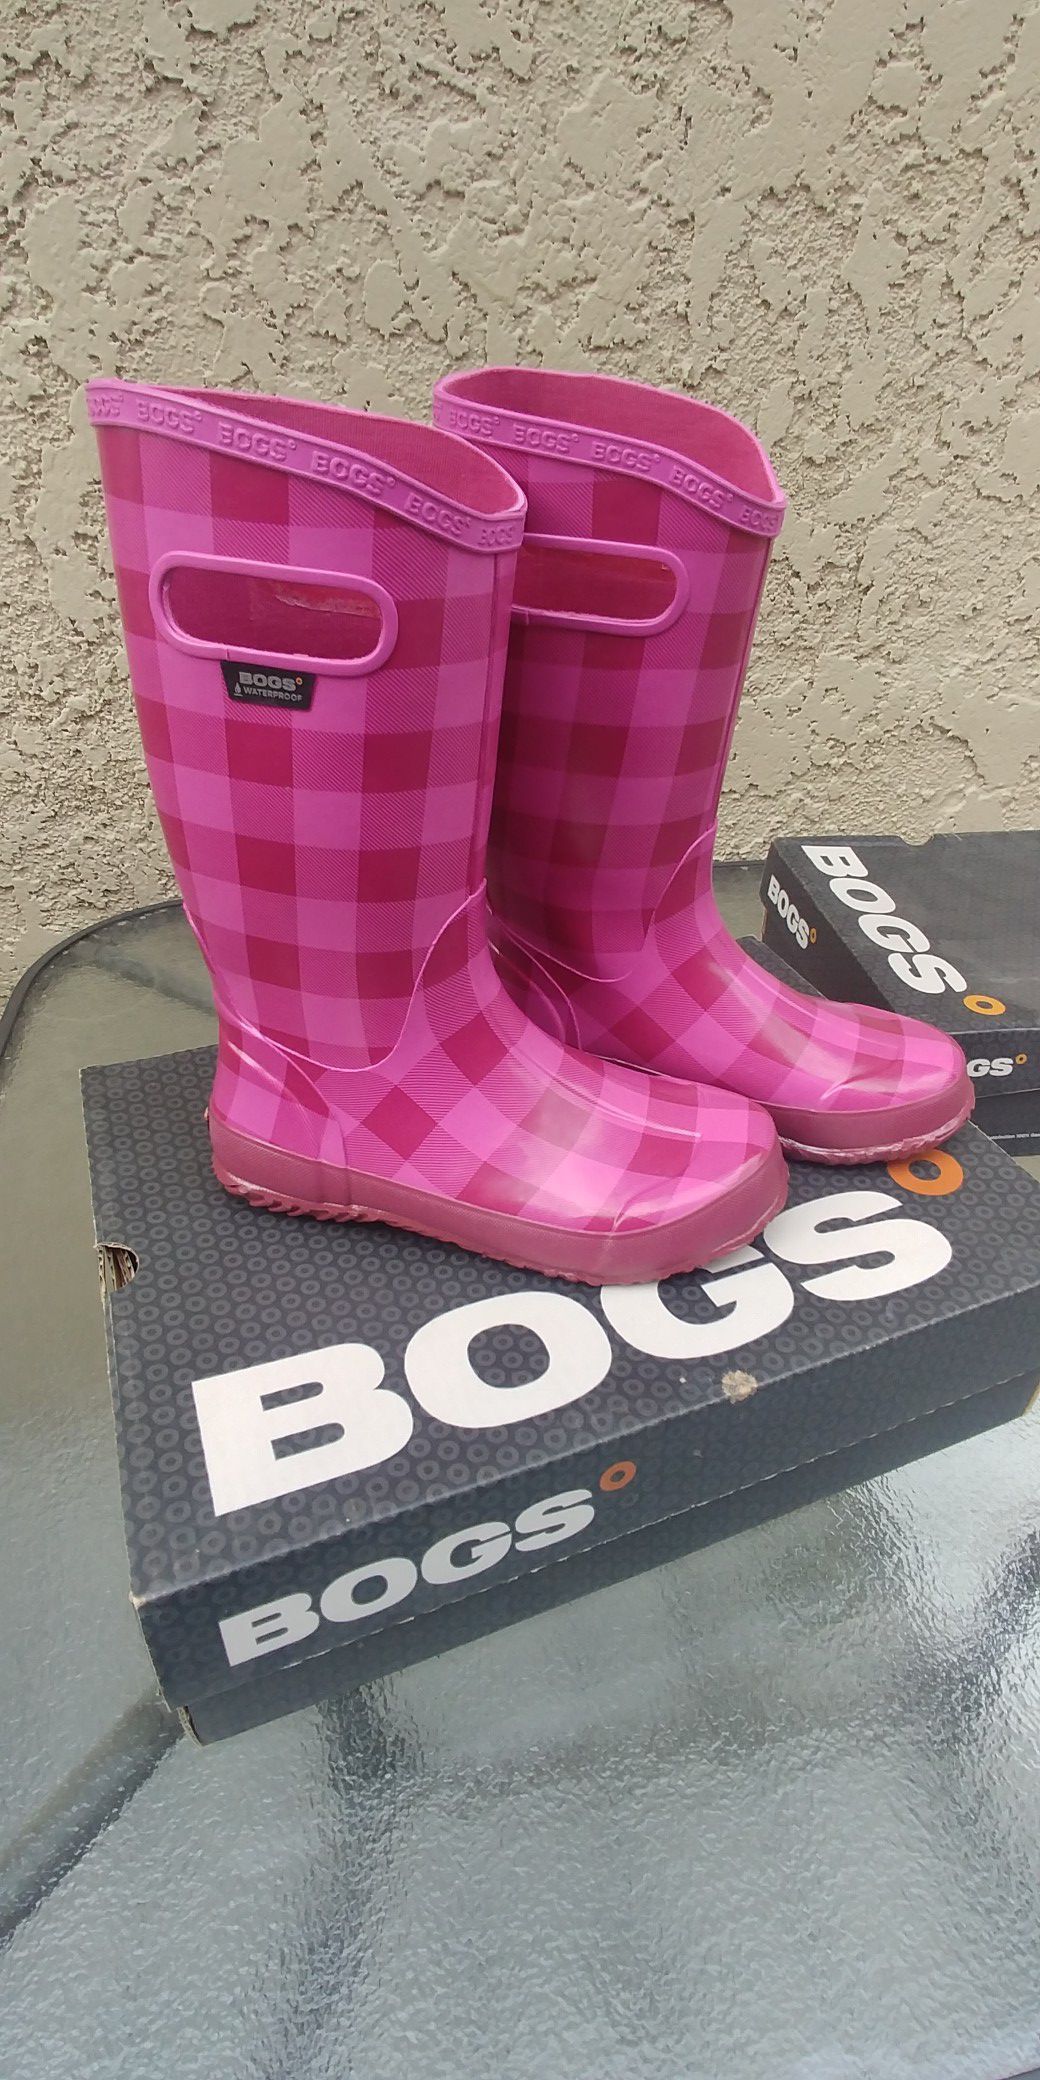 New Bogs Rain Boots Pink Women Girl Shoes Size 5